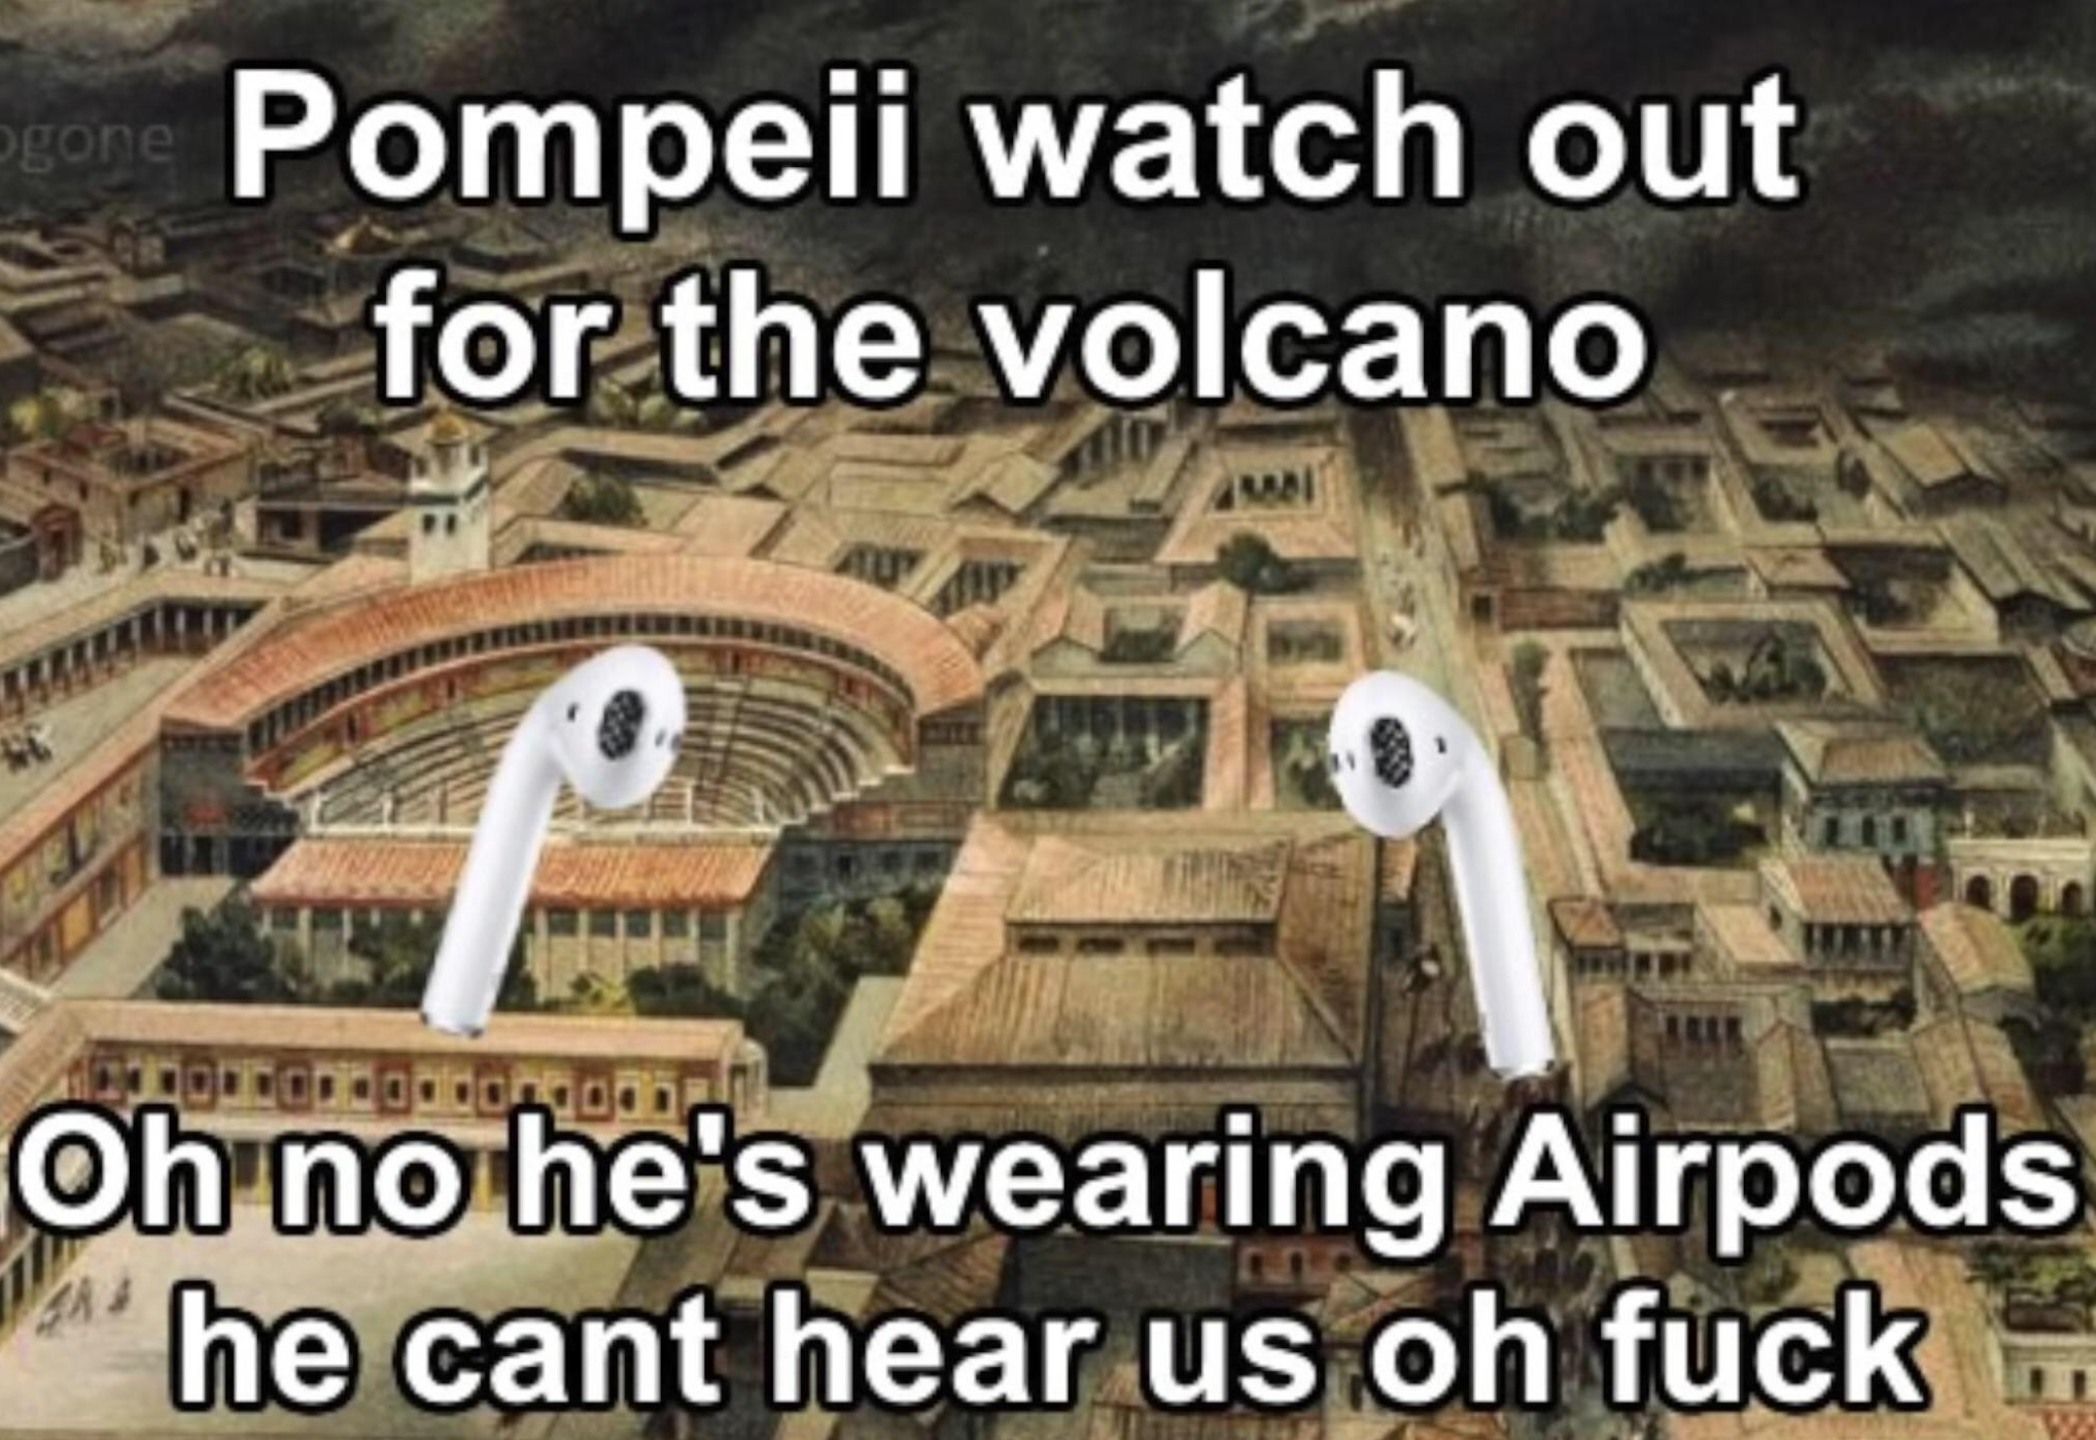 Pompeii moments before disaster